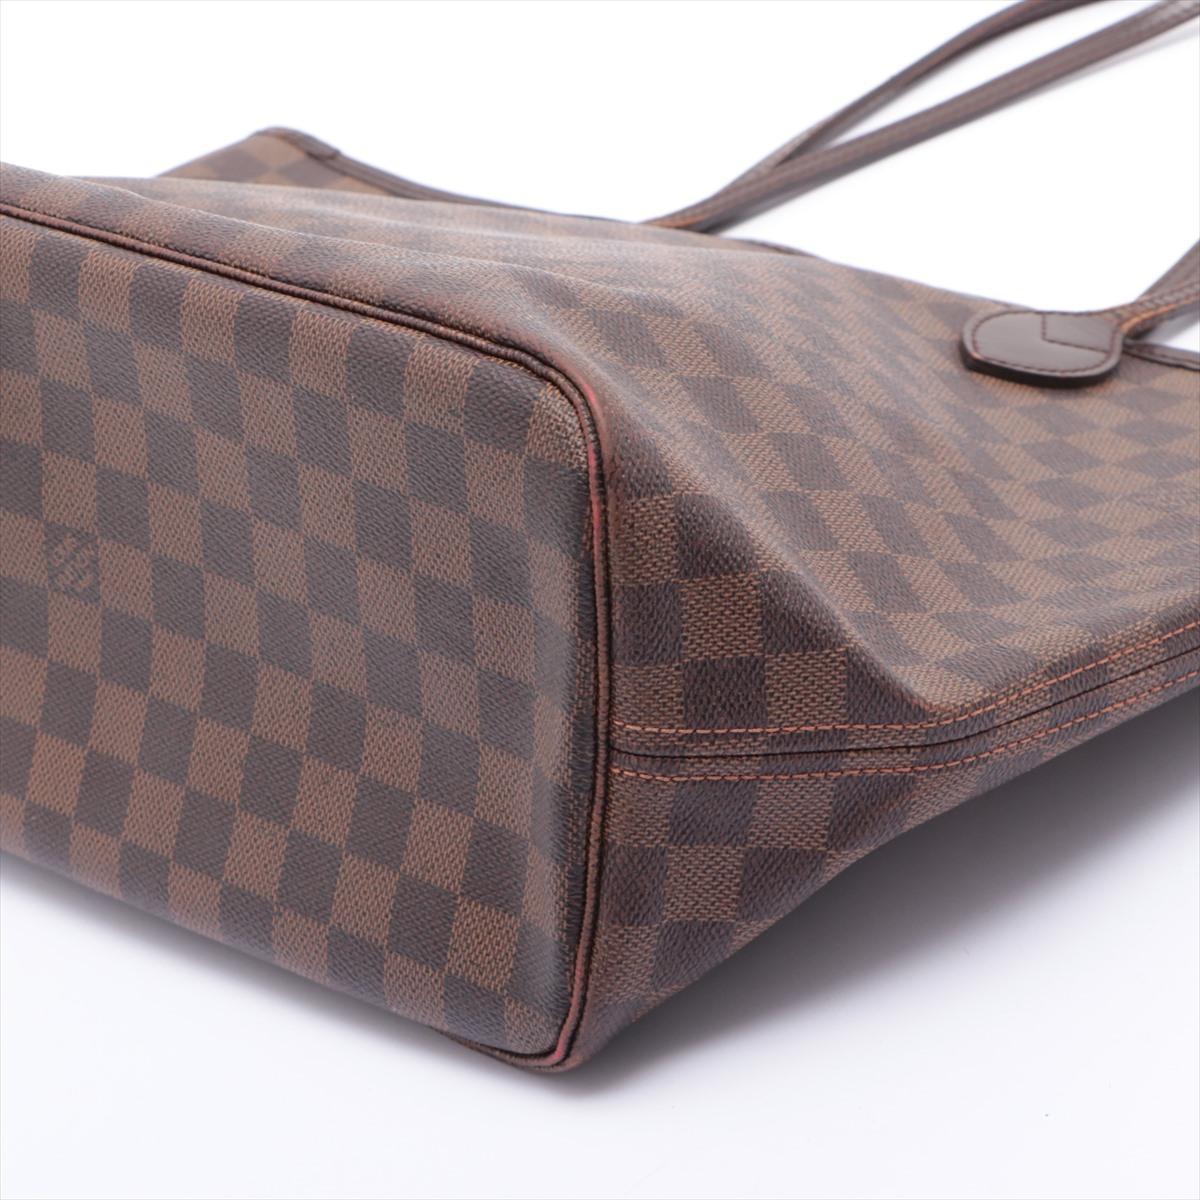 Louis Vuitton Damier Ebene Canvas Leather Neverfull MM Bag In Good Condition For Sale In Irvine, CA